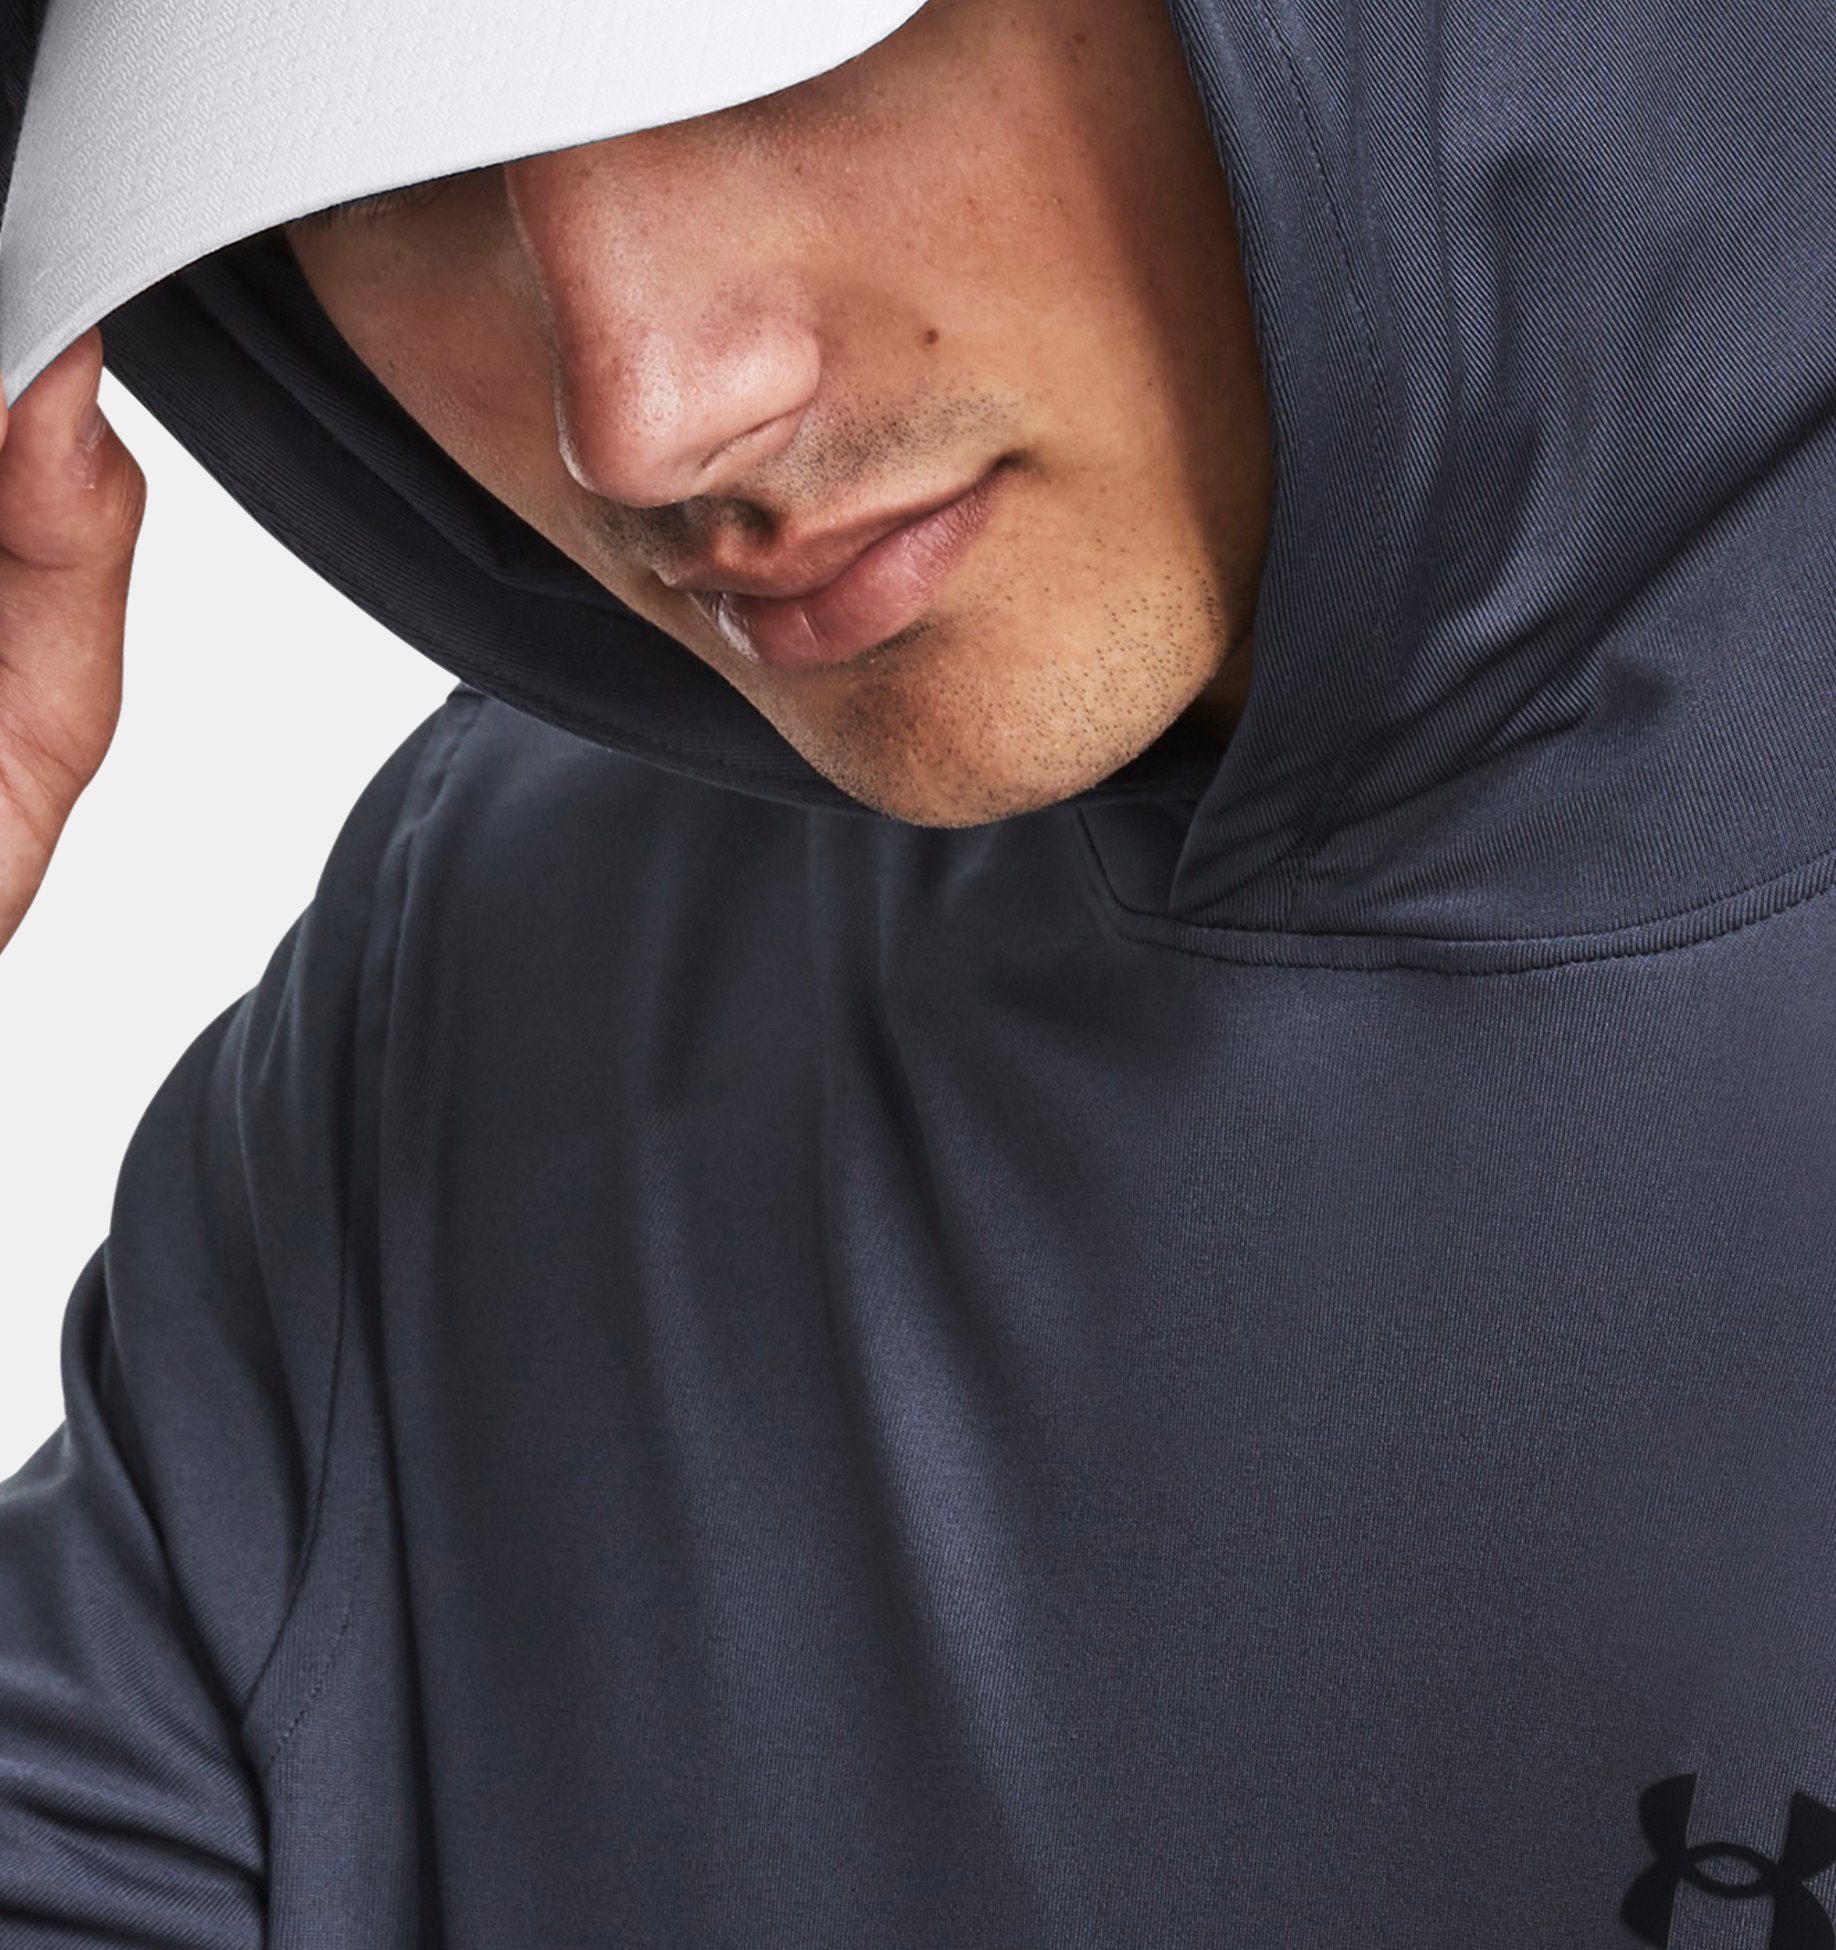 Under Armour Hoodies for sale in Perth, Western Australia